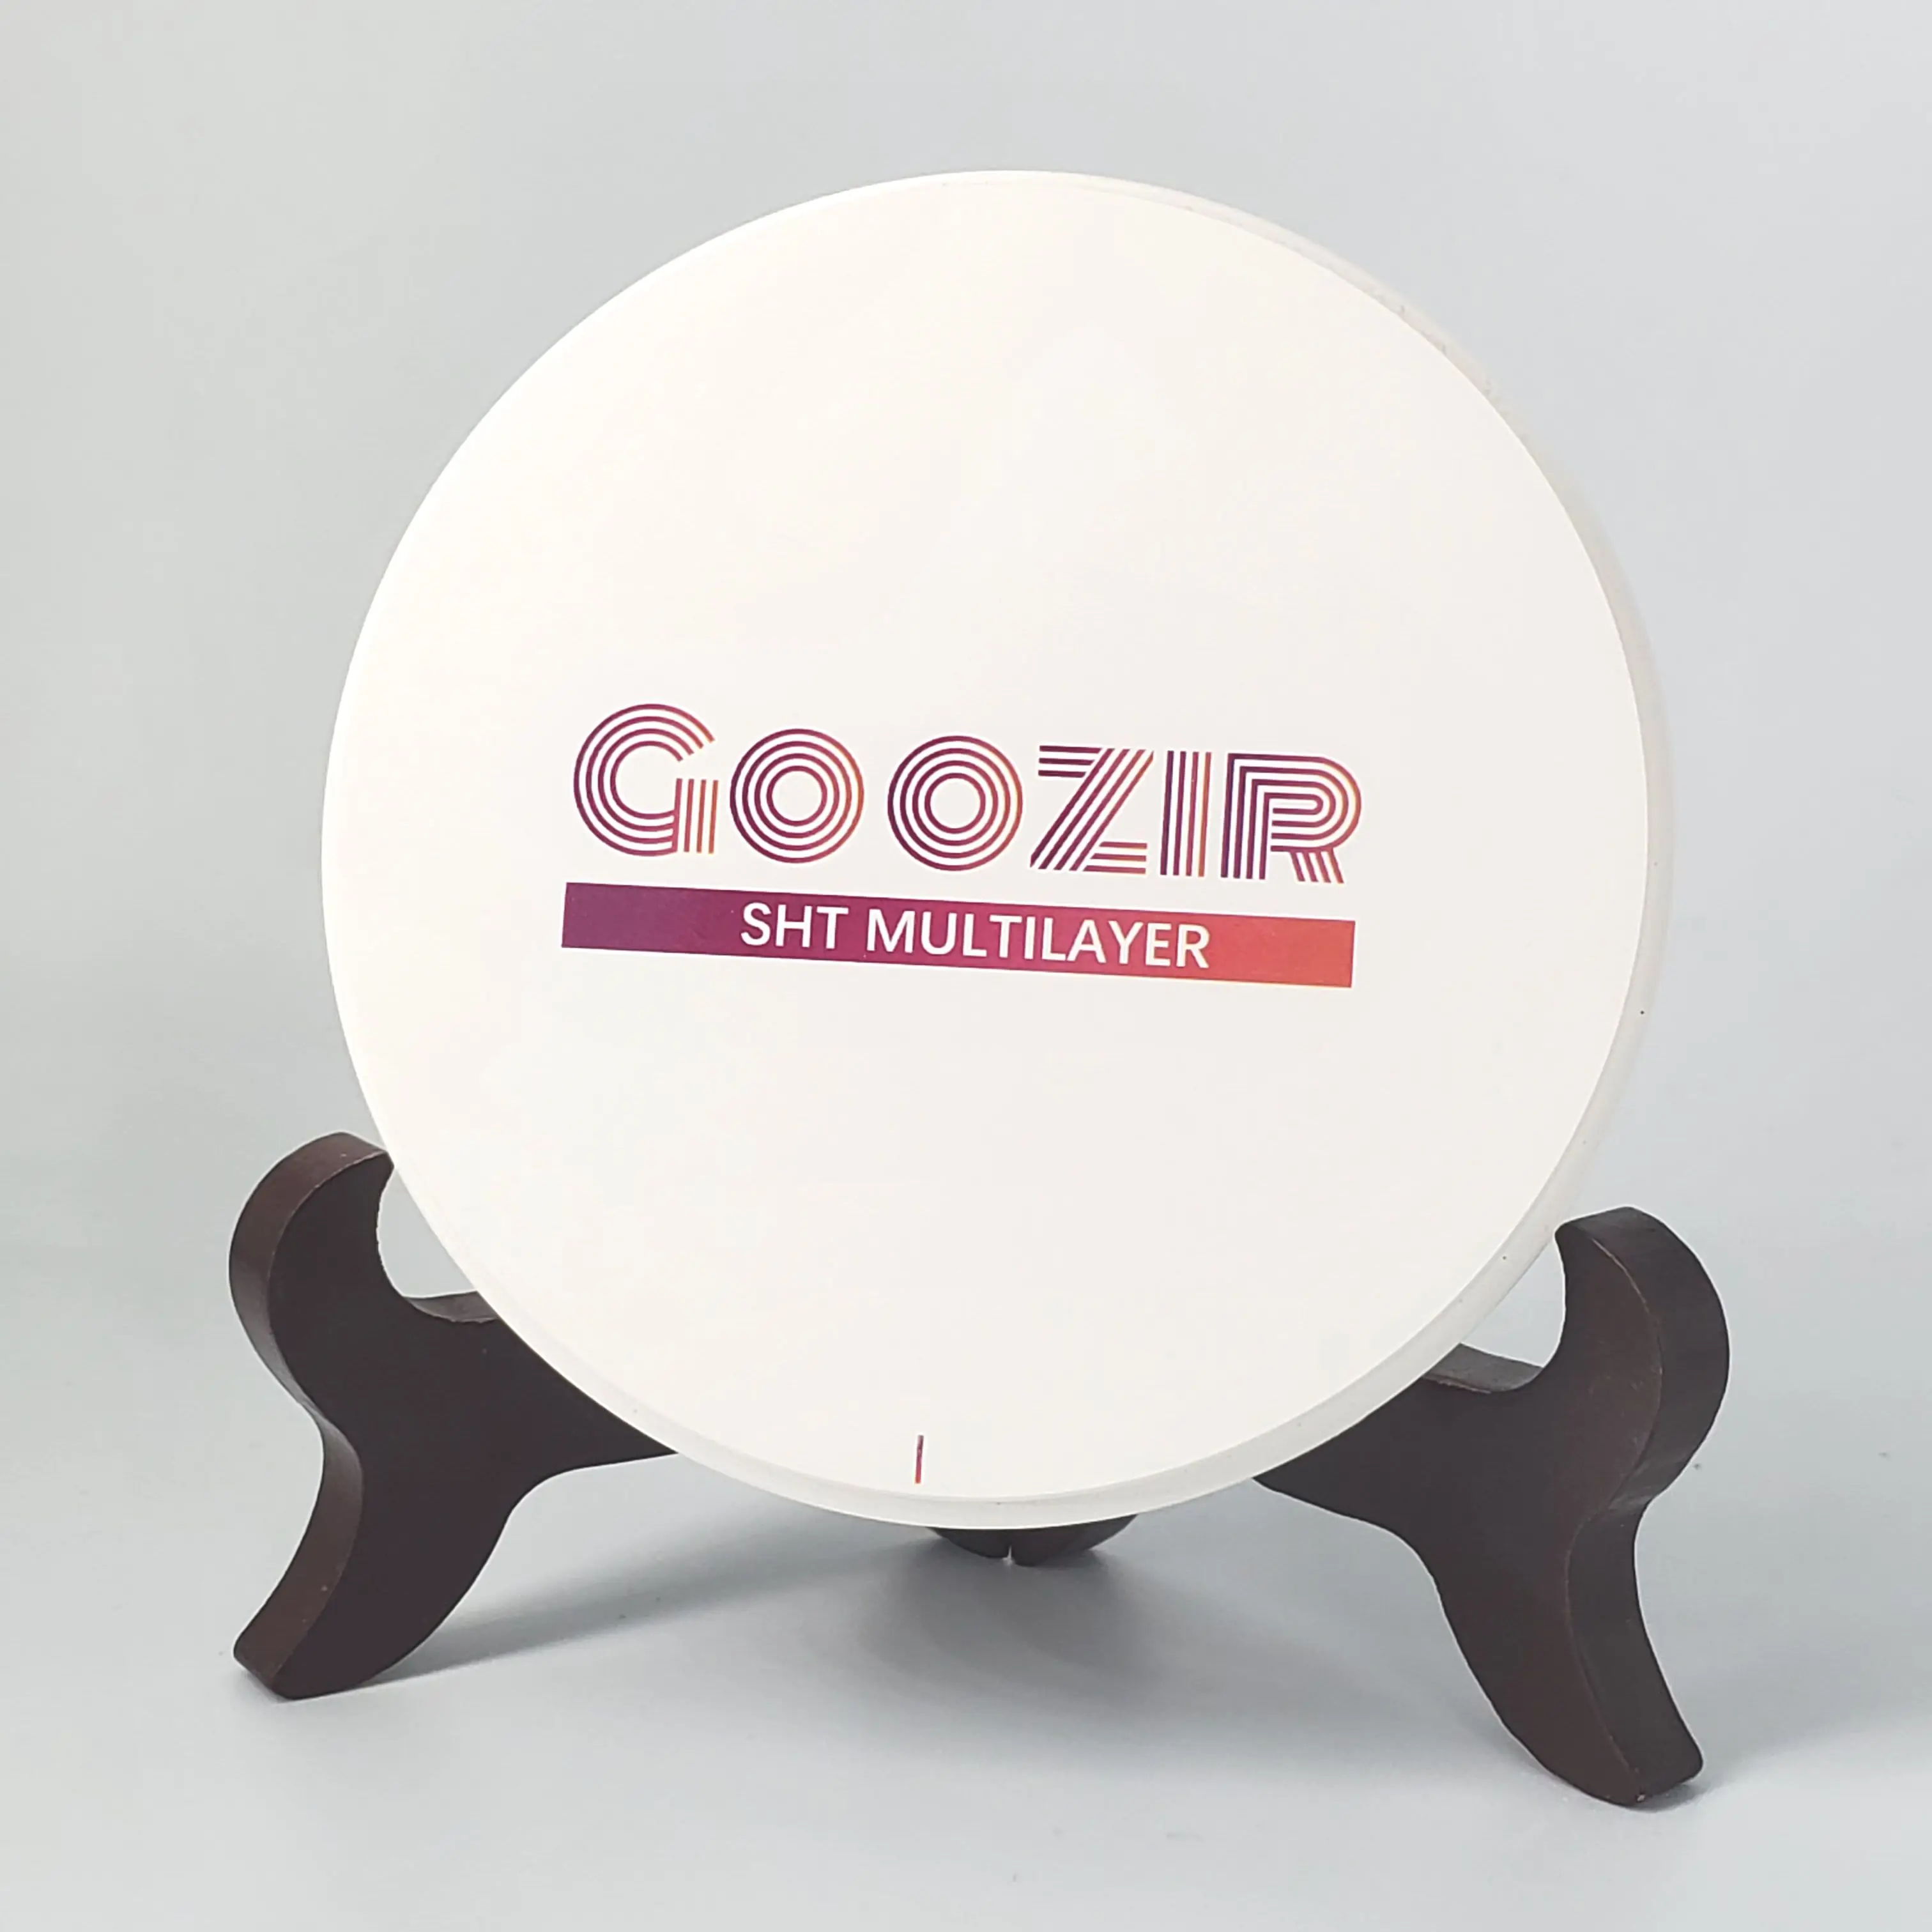 

Goozir SHT-ML Multilayer Zirconia Open System(98mm) Thickness 10mm—25mm for Dental Lab CAD/CAM